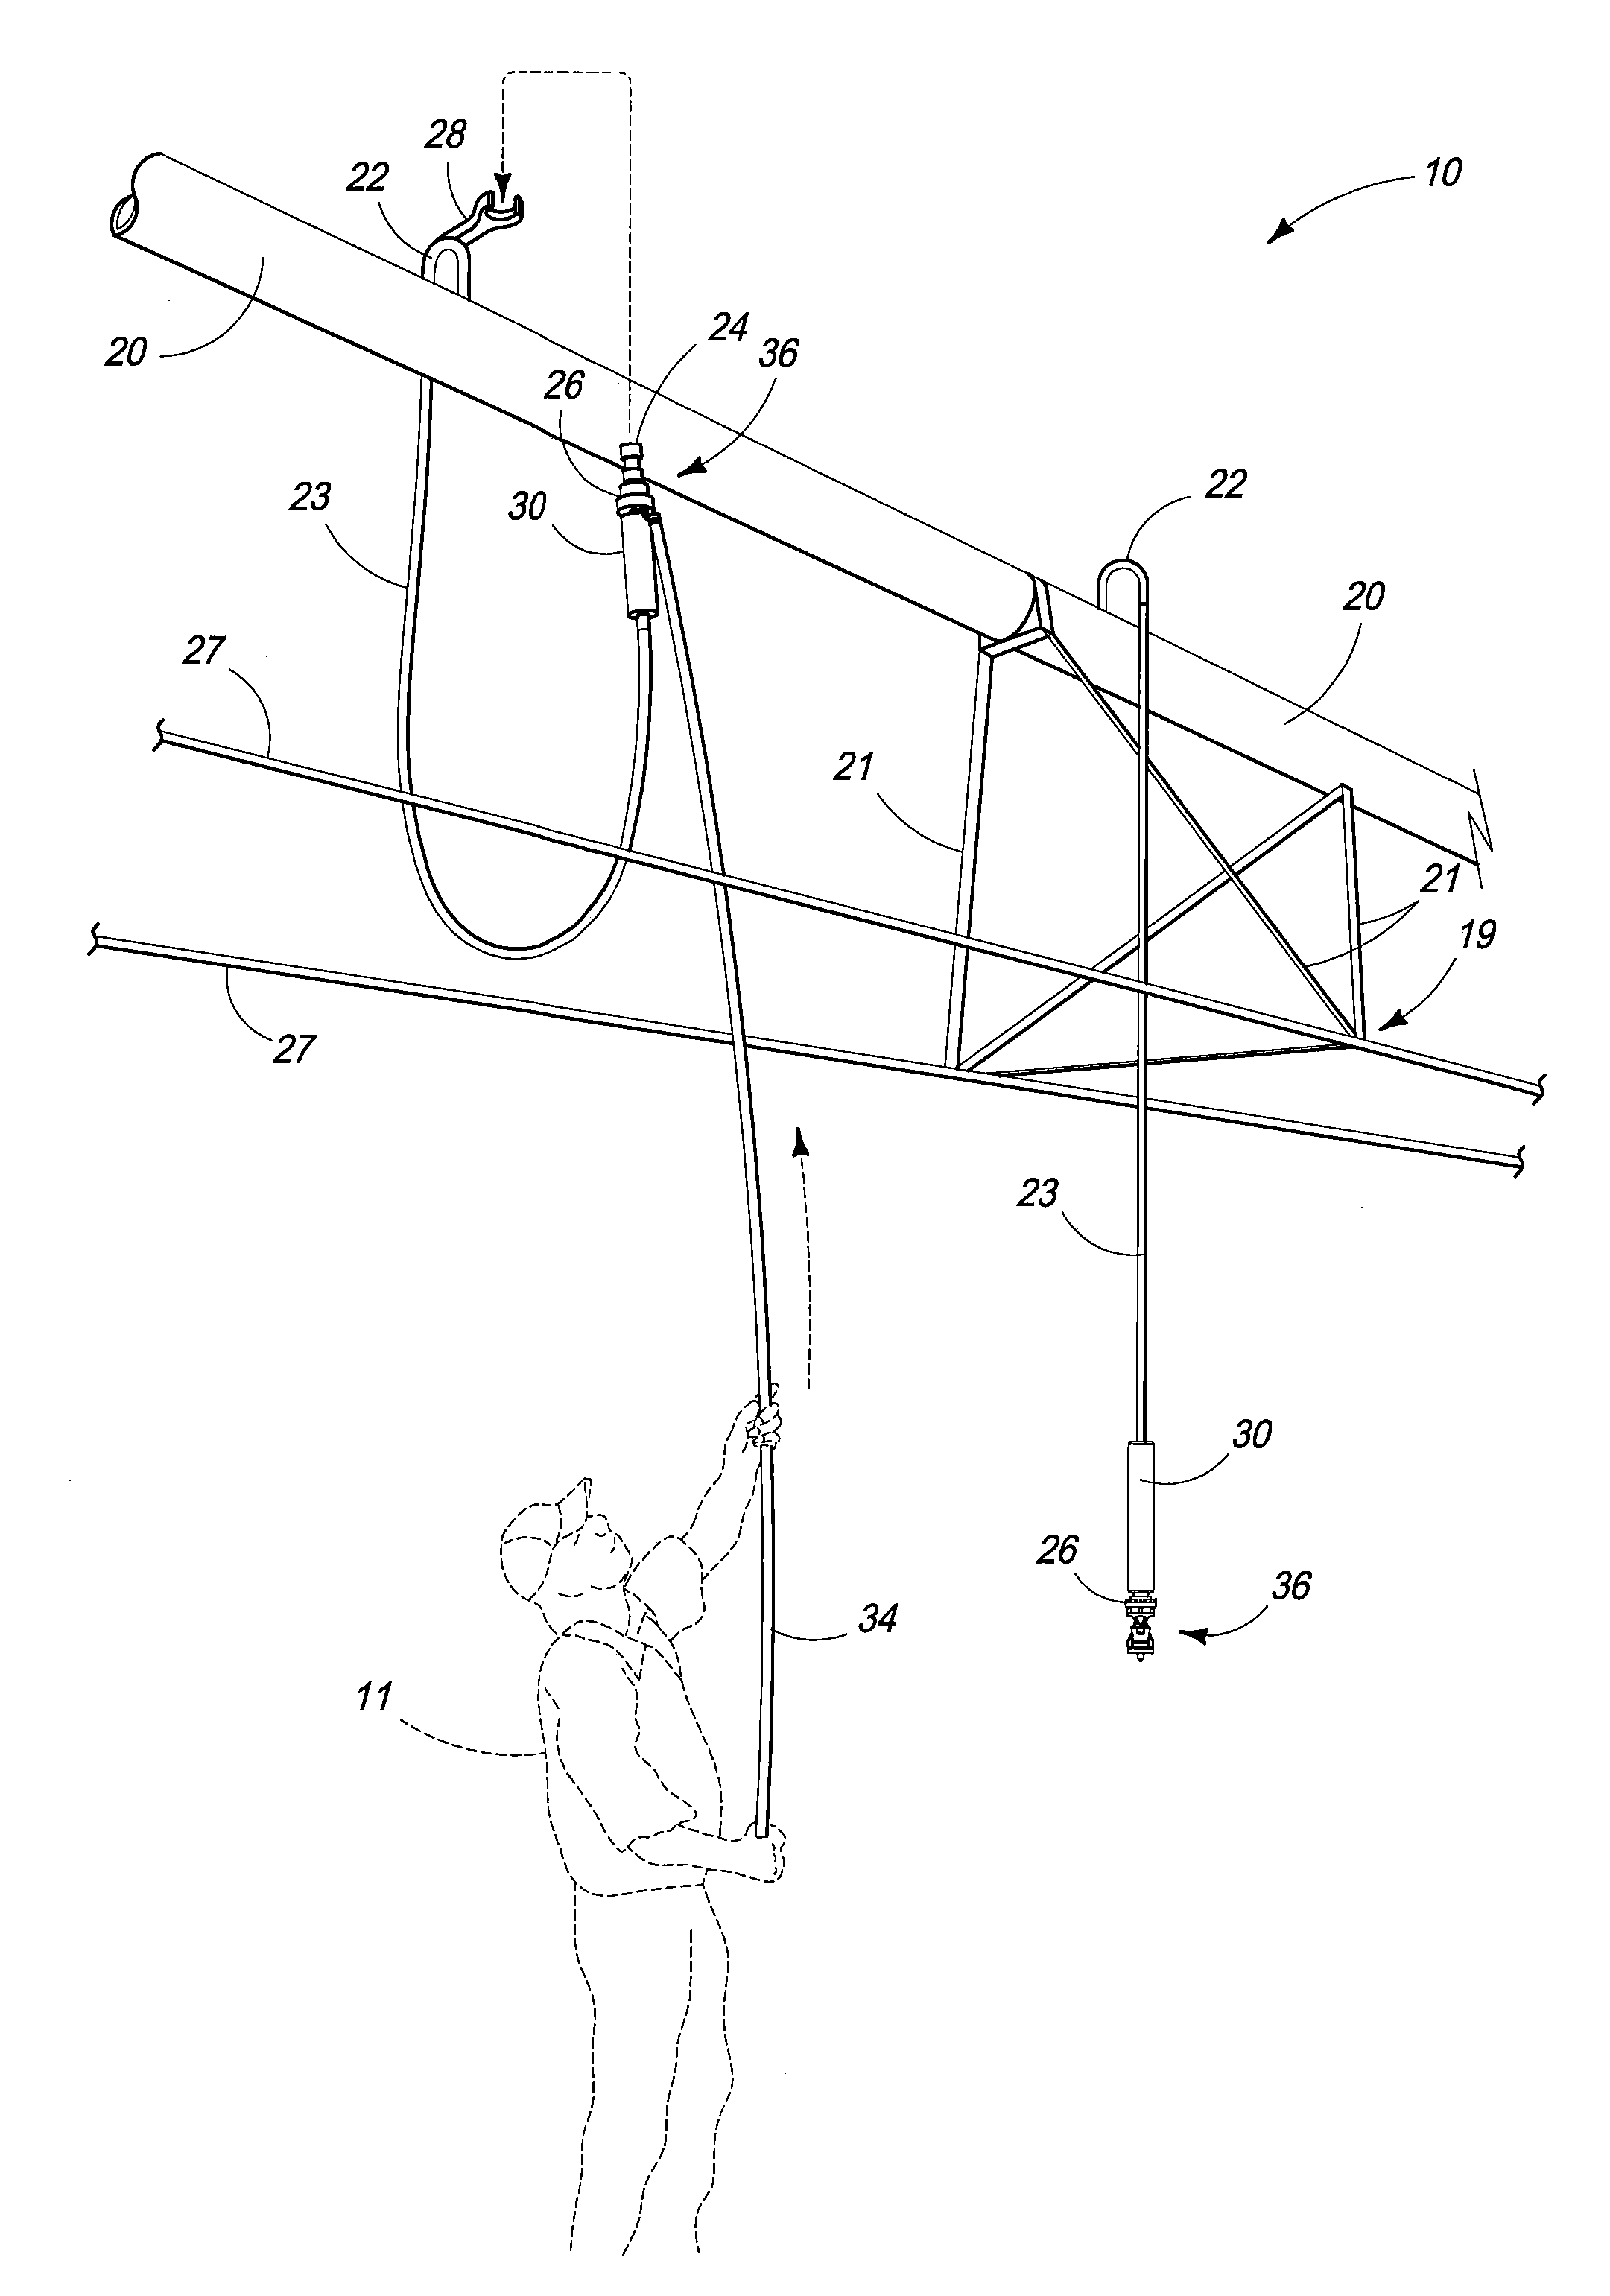 Apparatus and Method for Supporting a Flexible Hose Sprinkler Head on an Elevated Irrigation Supply Line